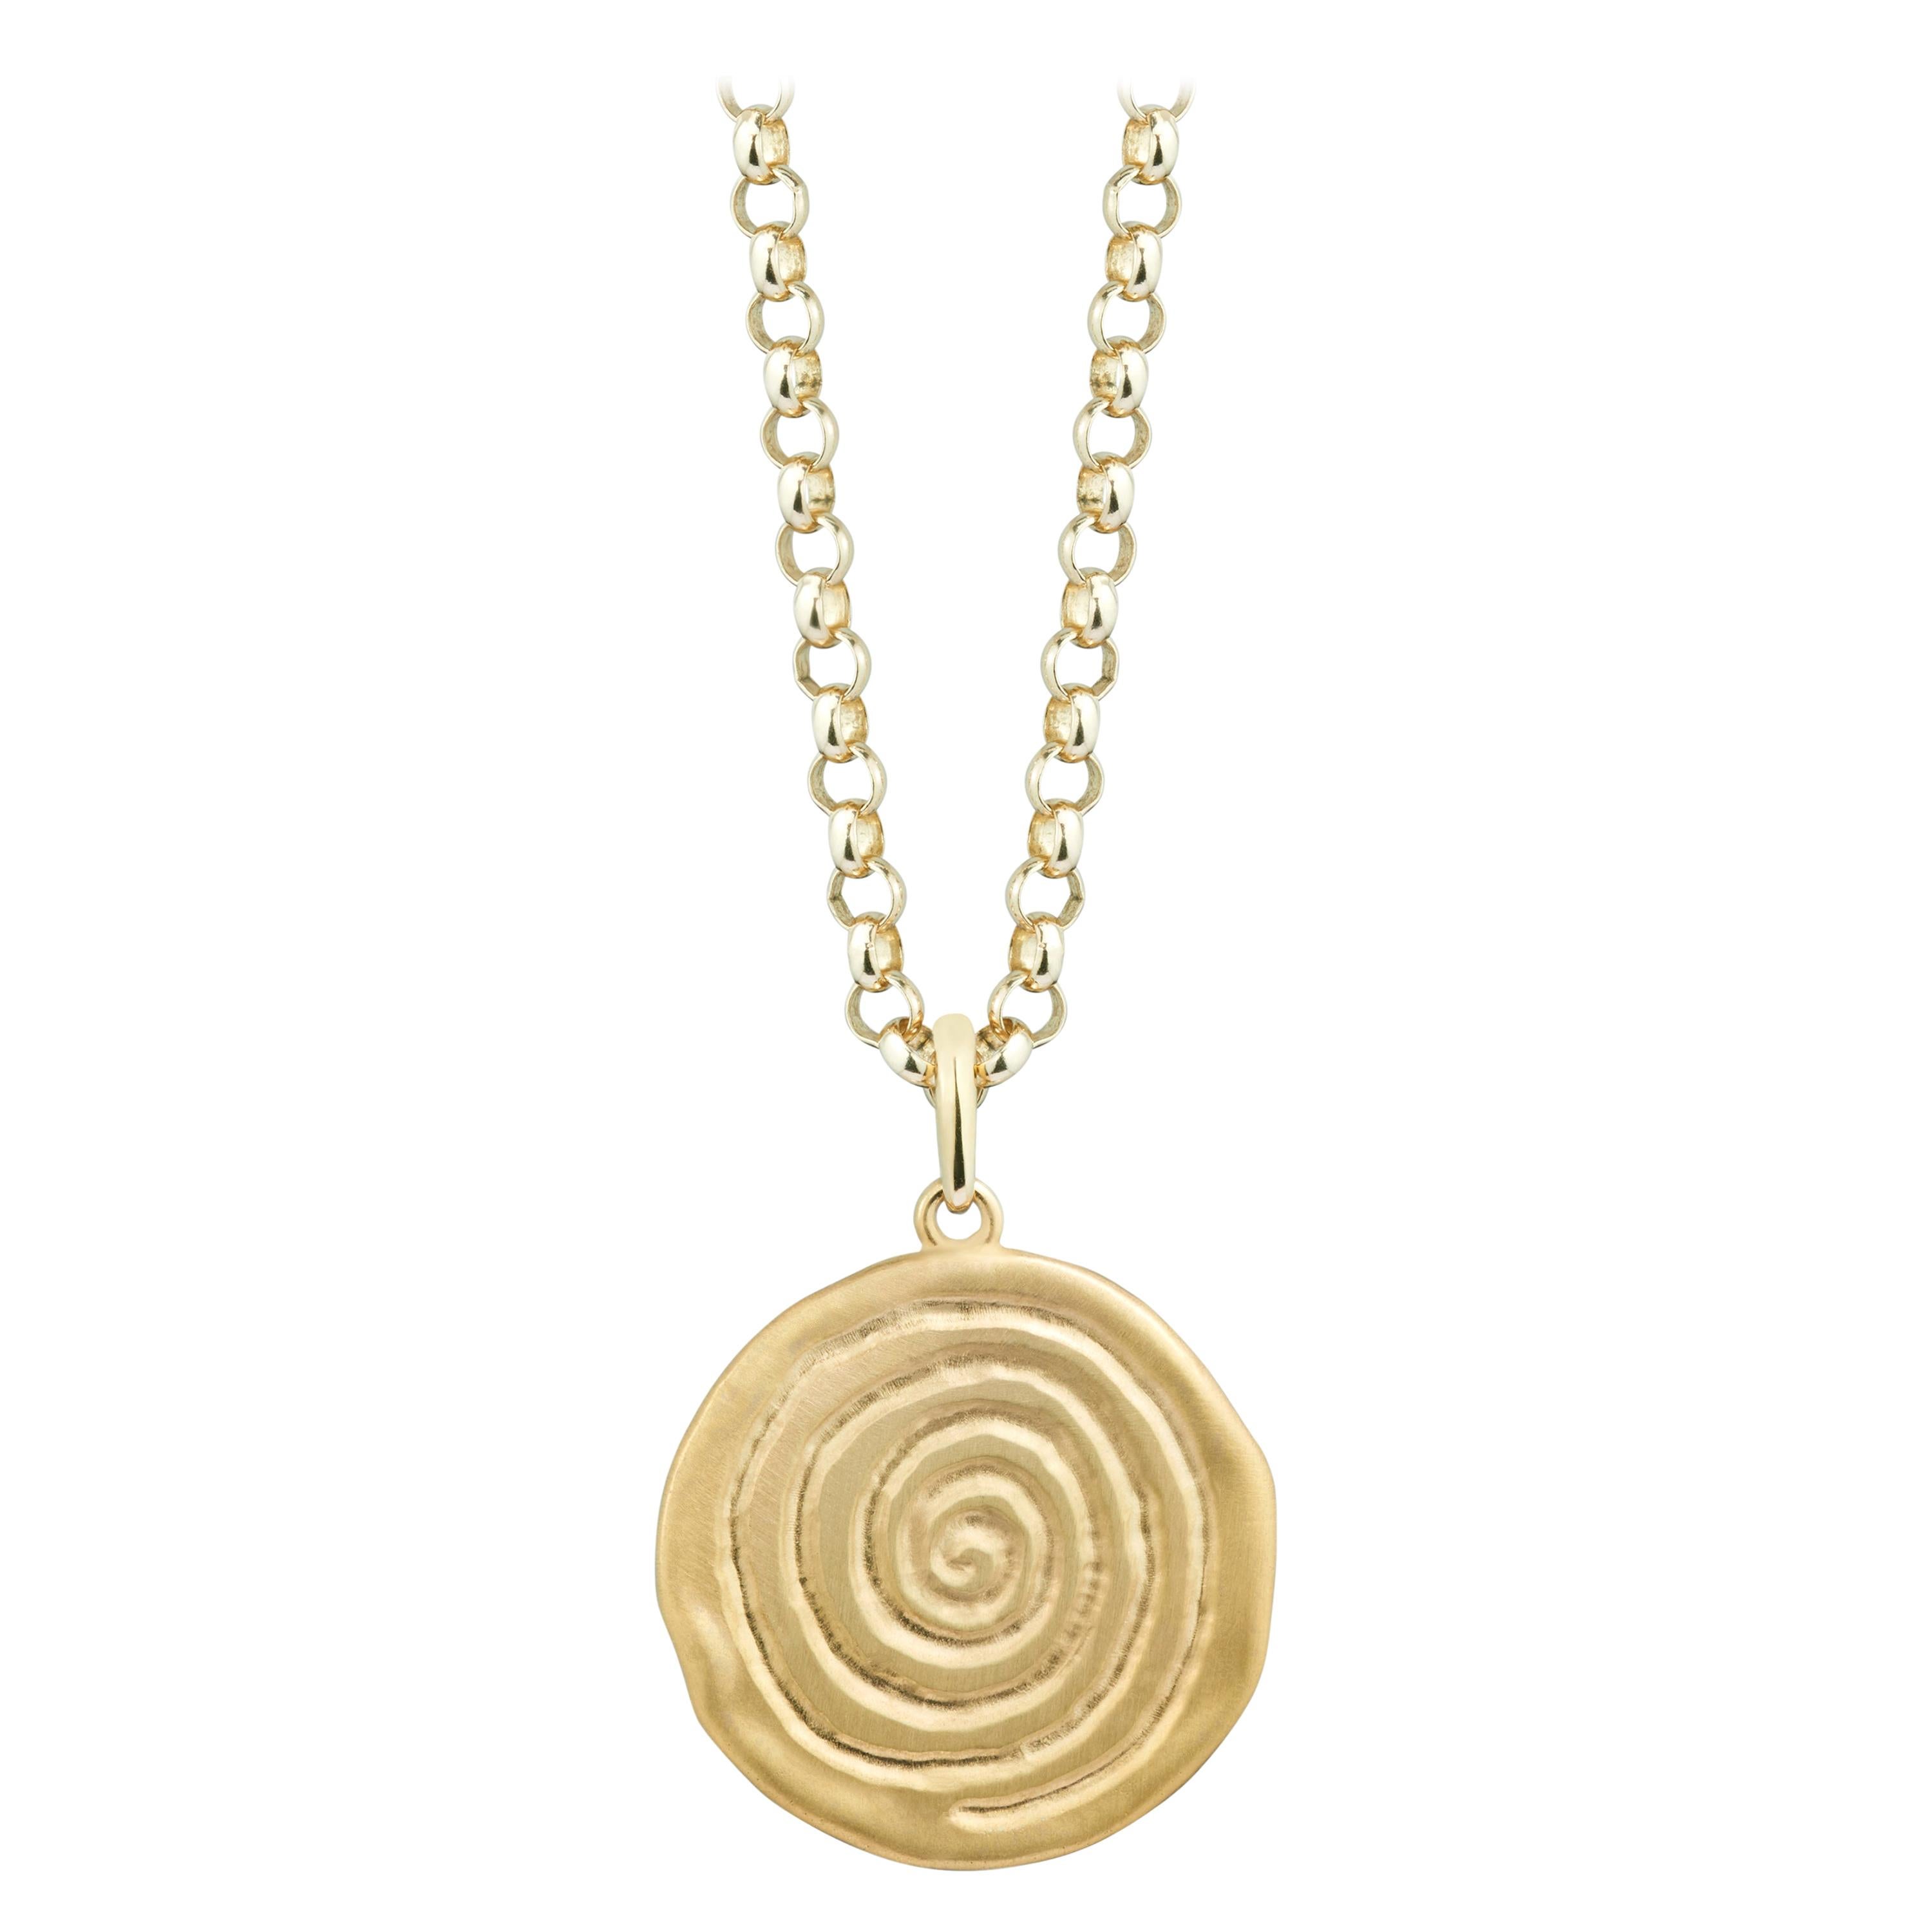 9 Karat Yellow Gold Infinity Spiral Disc Necklace with Chain